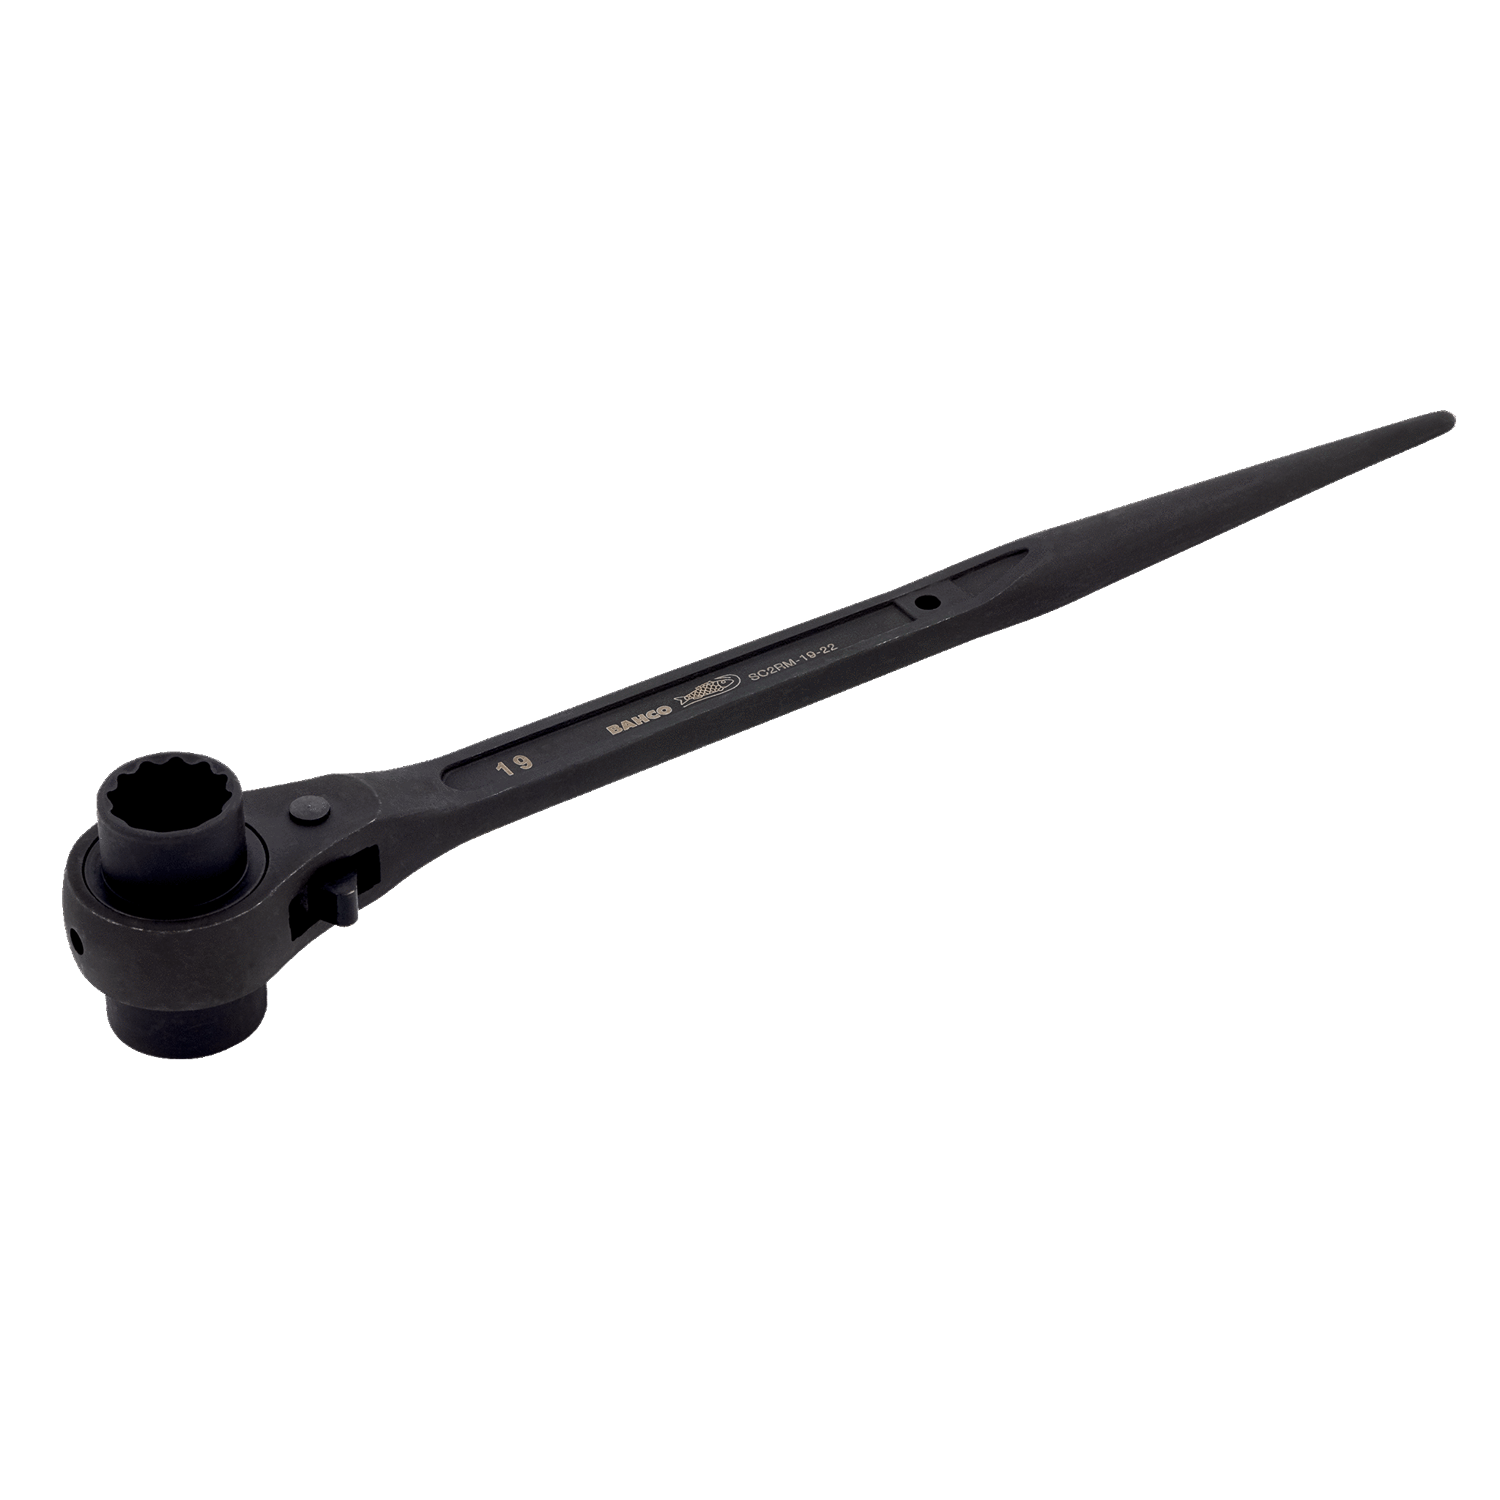 BAHCO SC2RM 1/2" Square Drive Scaffolding Wrench (BAHCO Tools) - Premium Scaffolding Wrench from BAHCO - Shop now at Yew Aik.